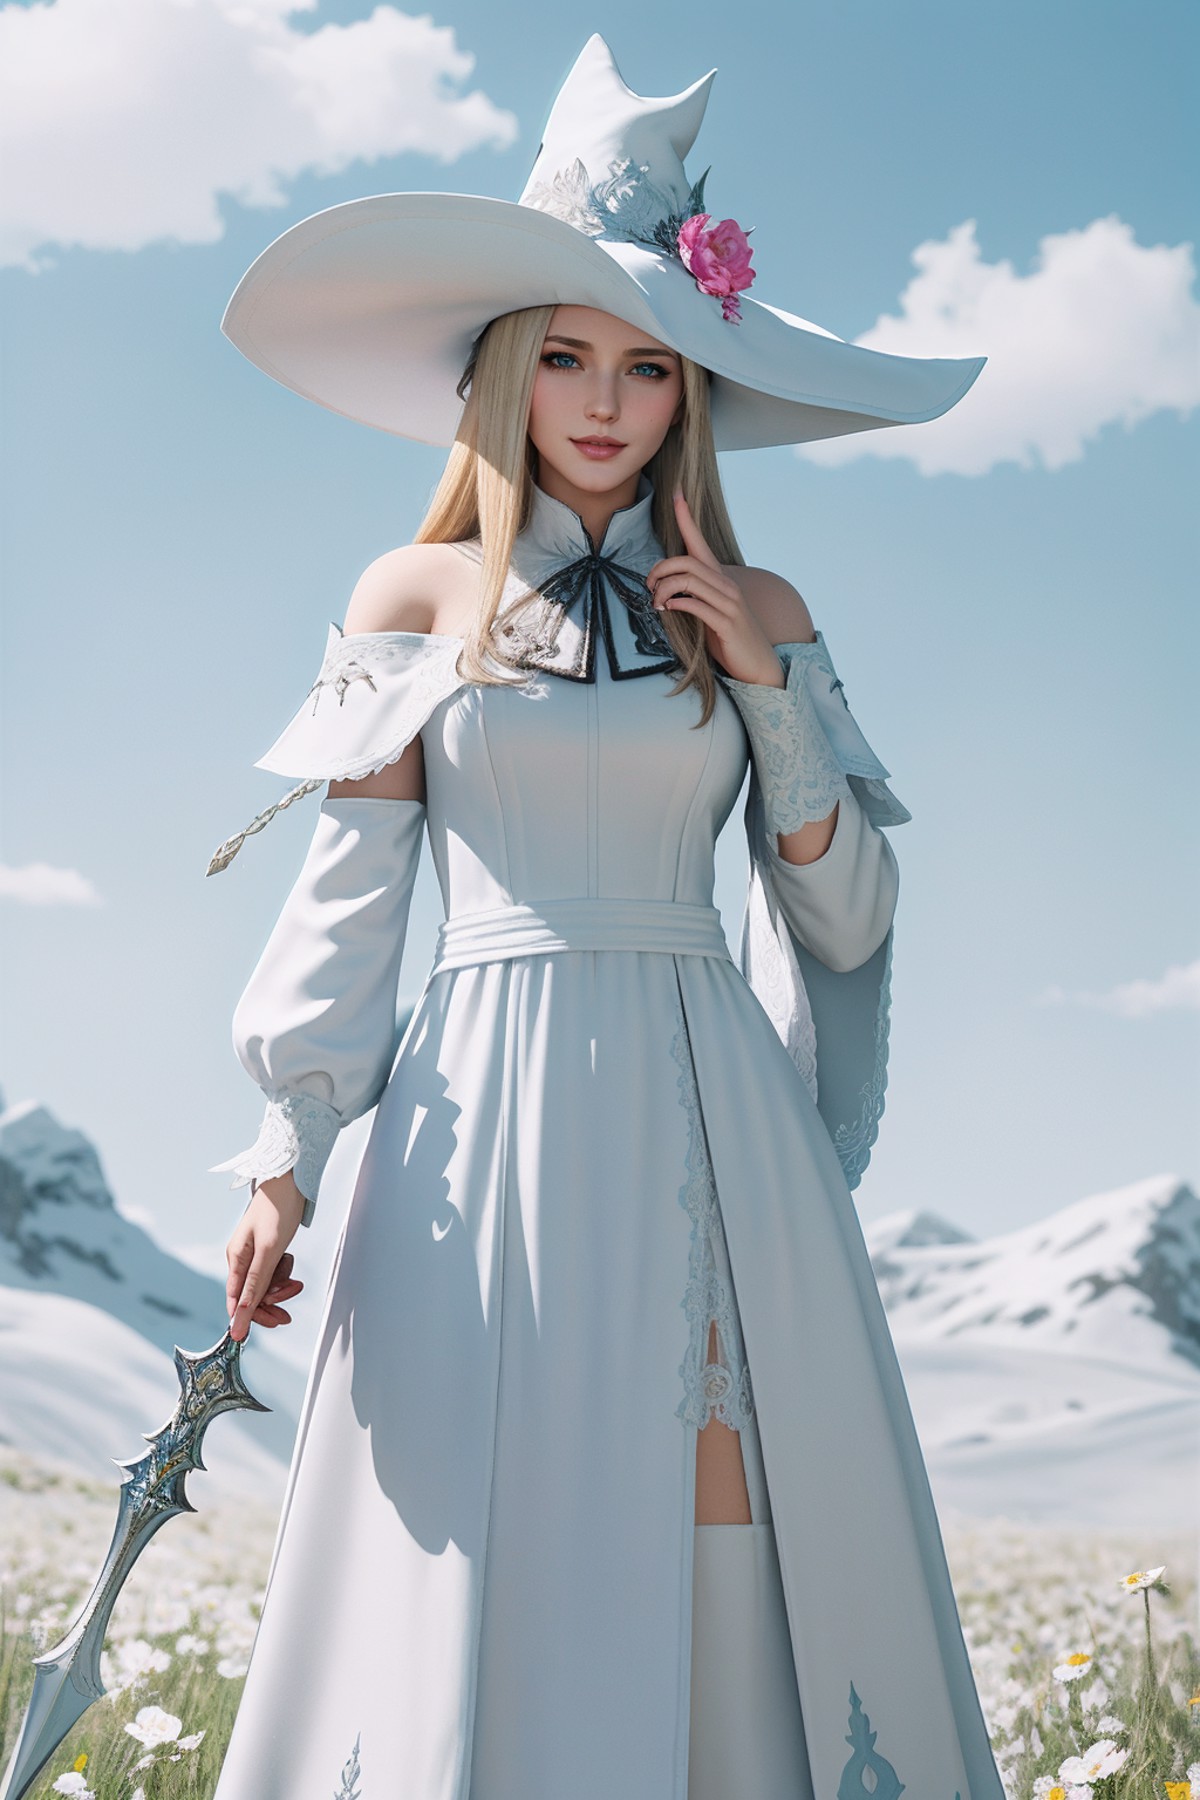 ((Masterpiece, best quality,edgQuality)),smug,smirk,blonde hair,
edgWHM, white mage robe, a woman in a white dress and hat...